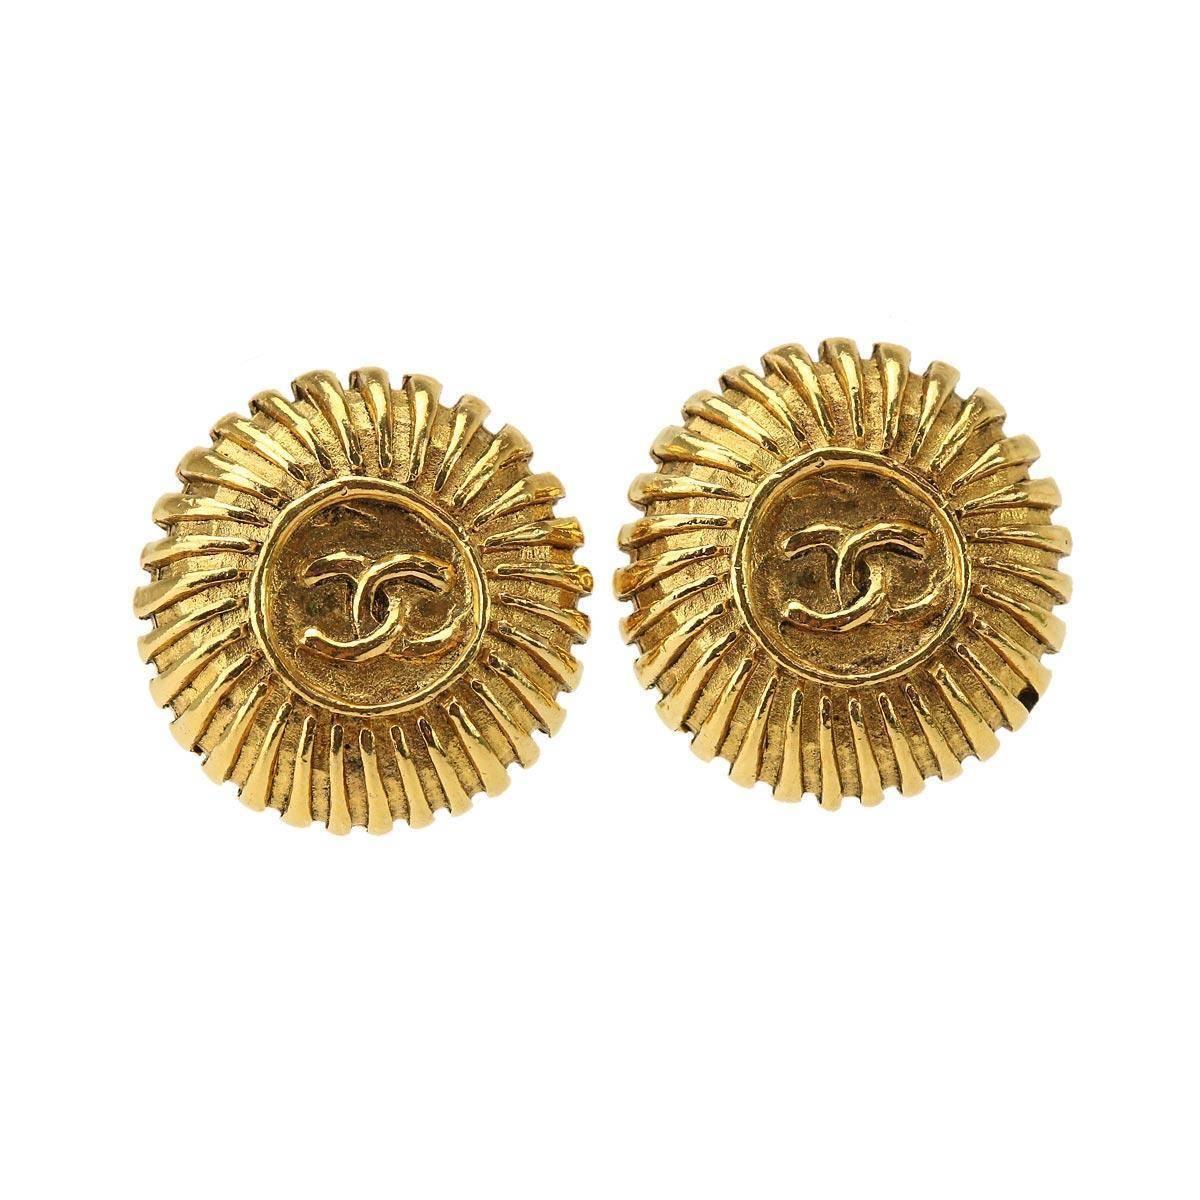 Chanel Gold Textured Starburst Charm Evening Stud Earrings in Box